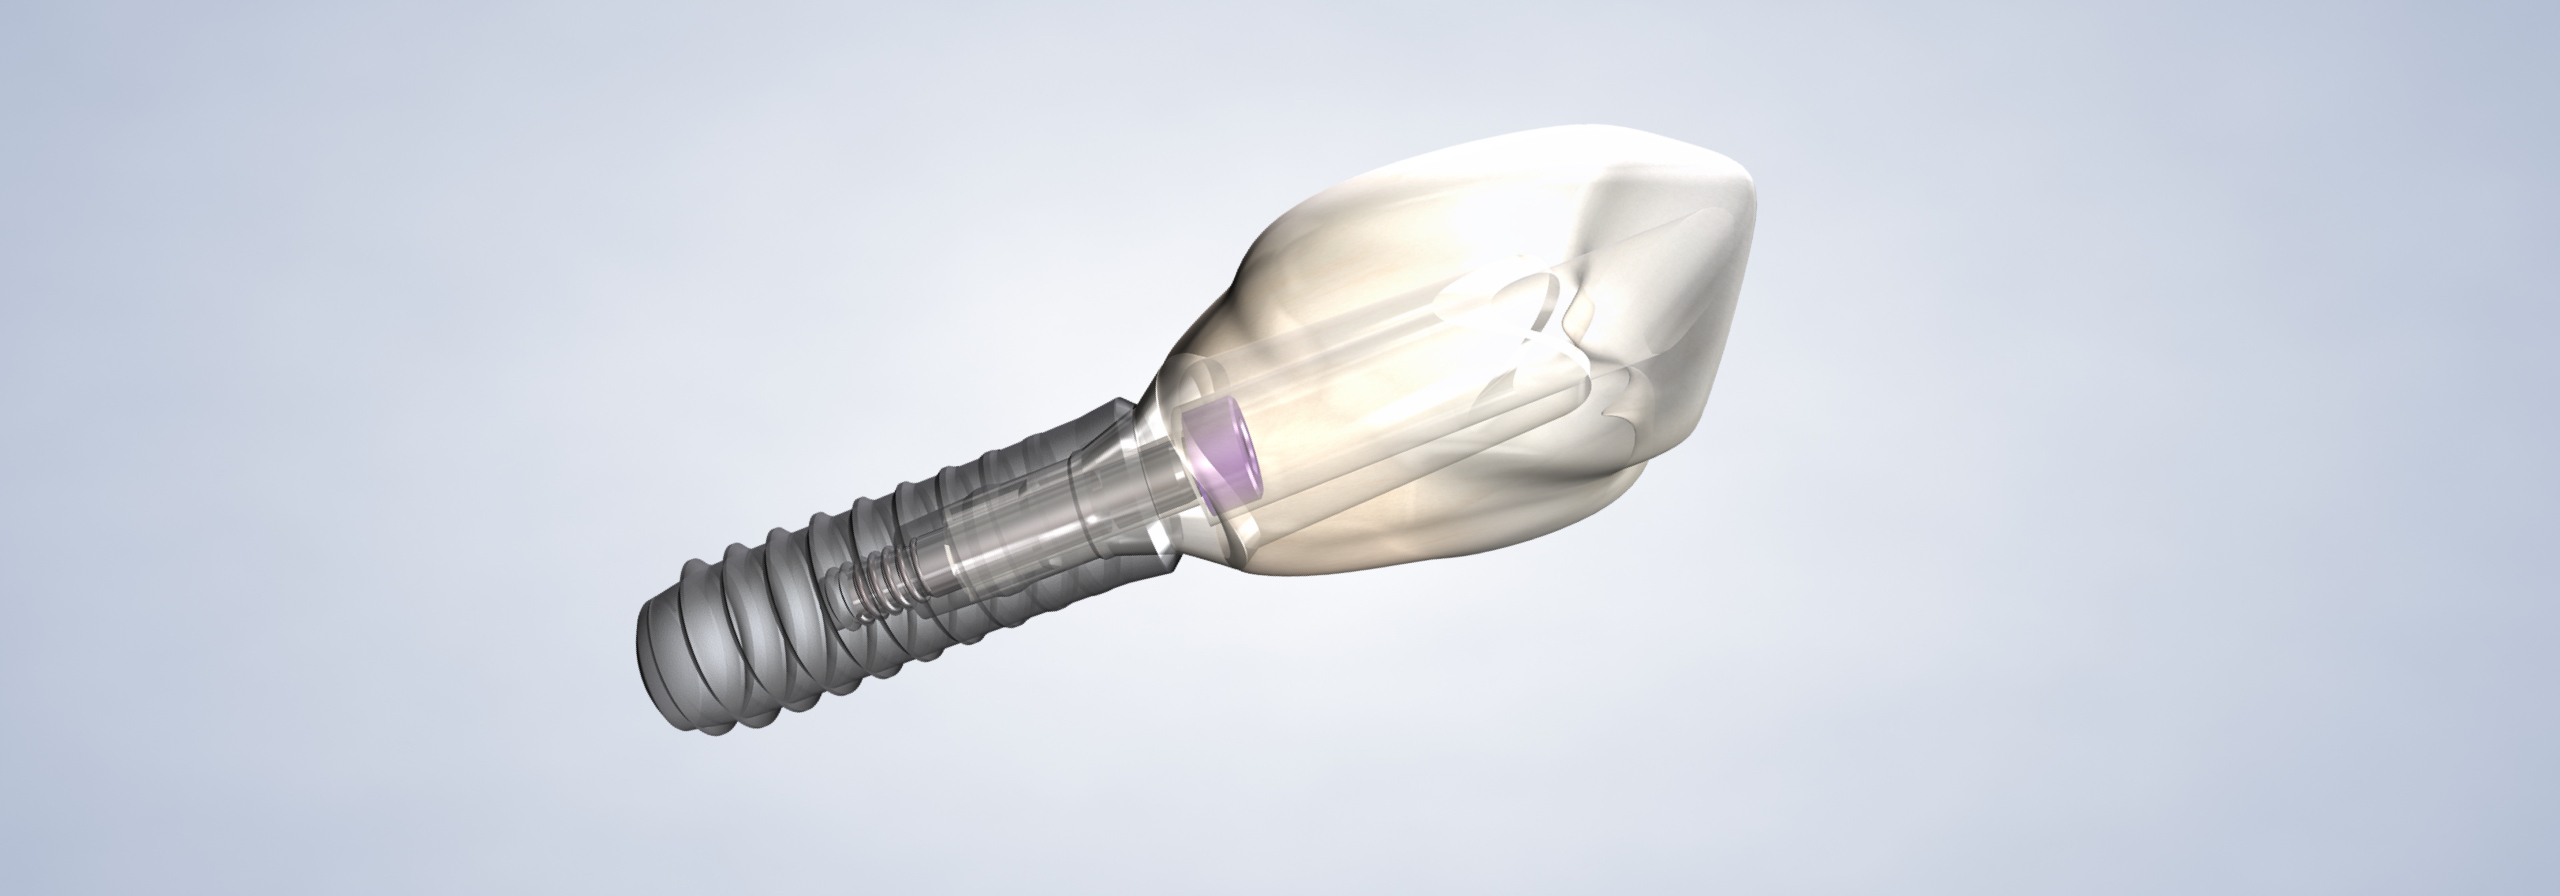 Dental implants in Louisville and Mt. Washington, KY, and Jeffersonville, IN